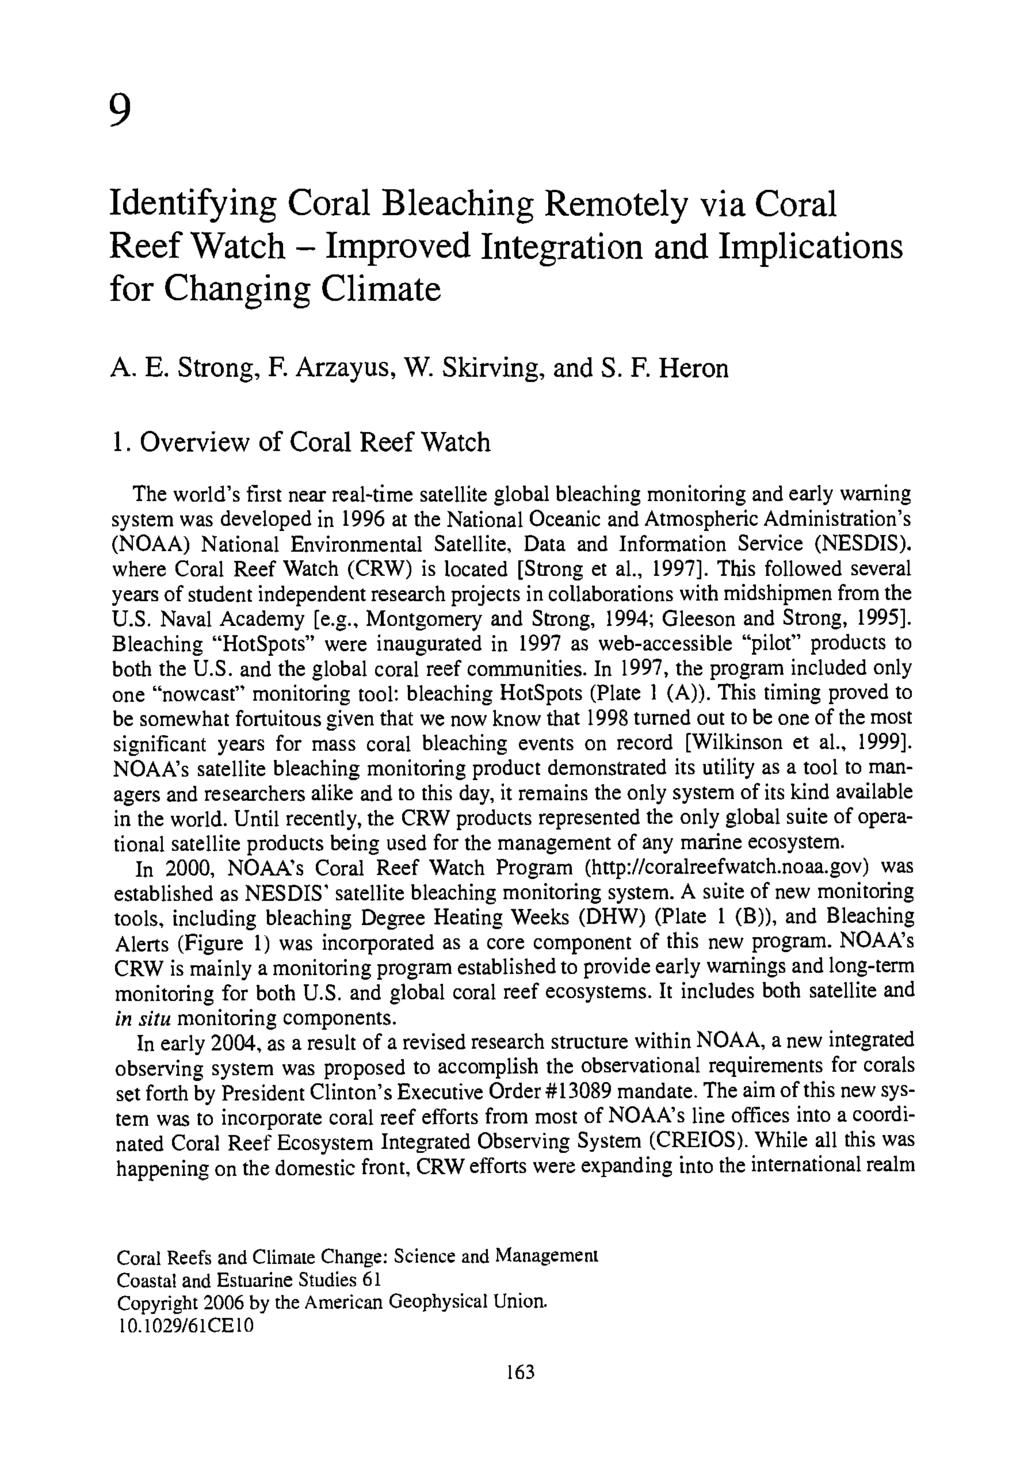 www.ebook777.com 9 Identifying Coral Bleaching Remotely via Coral Reef Watch- Improved Integration and Implications for Changing Climate A. E. Strong, F. Arzayus, W. Skirving, and S. F. Heron 1.